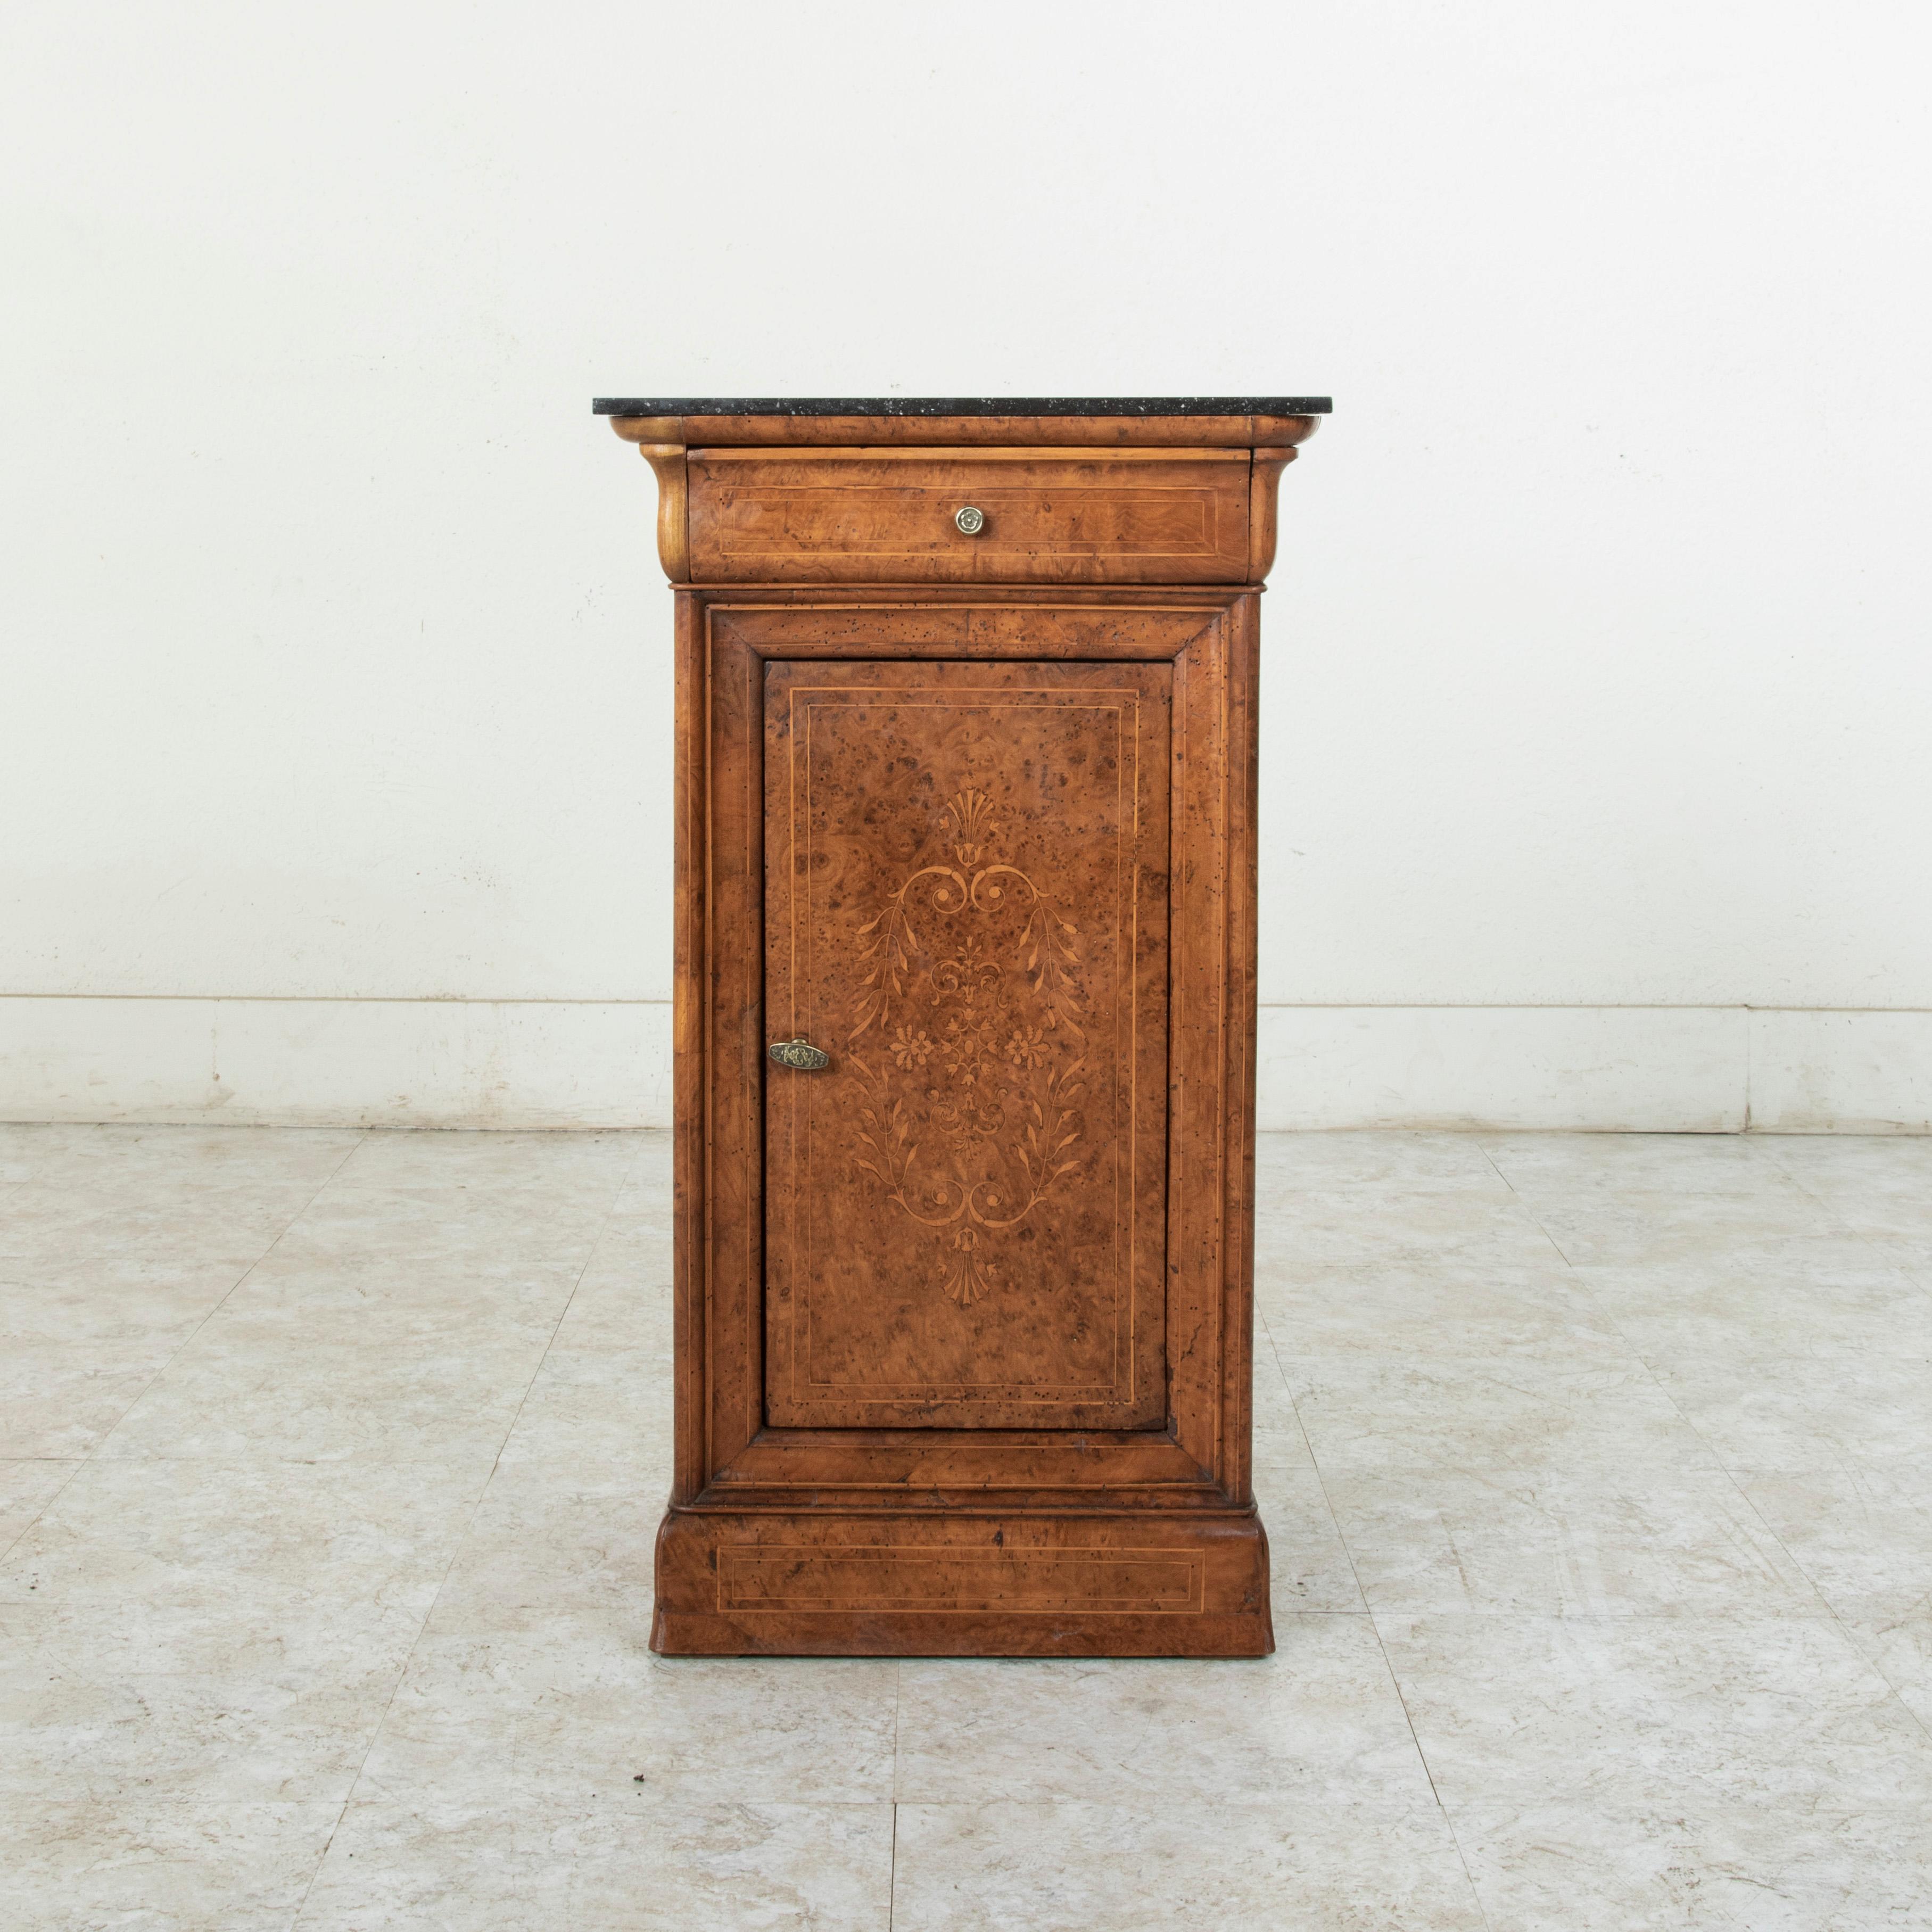 This early 19th century French Charles X period cabinet features a facade constructed of bird's-eye maple with fine lines of inlaid lemon wood that create an inset border around each face. A single drawer beneath its black marble top fits seamlessly